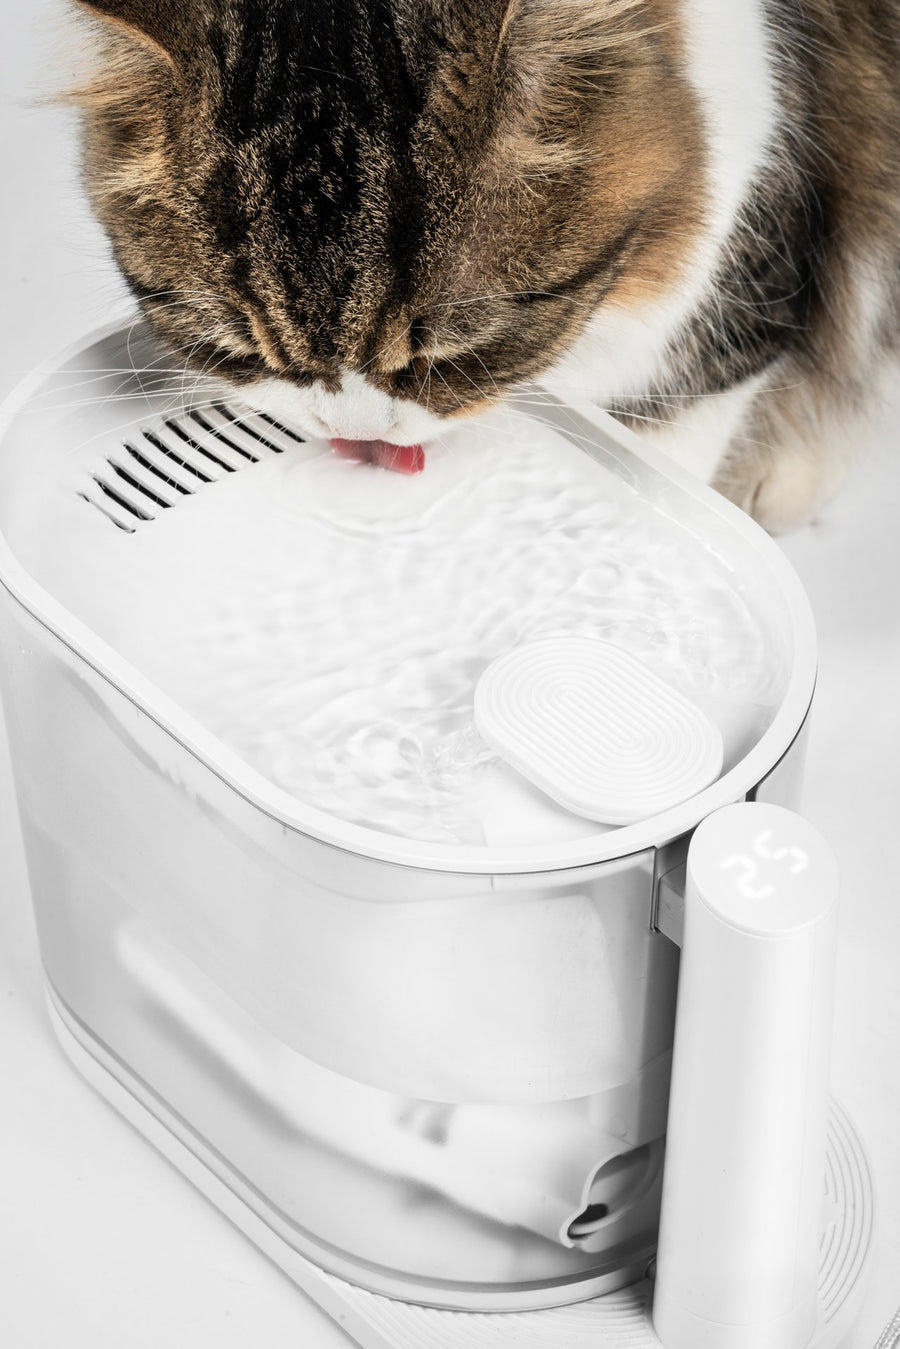 【PIDAN】23° Water Fountain for Pets with Water Temperature Control